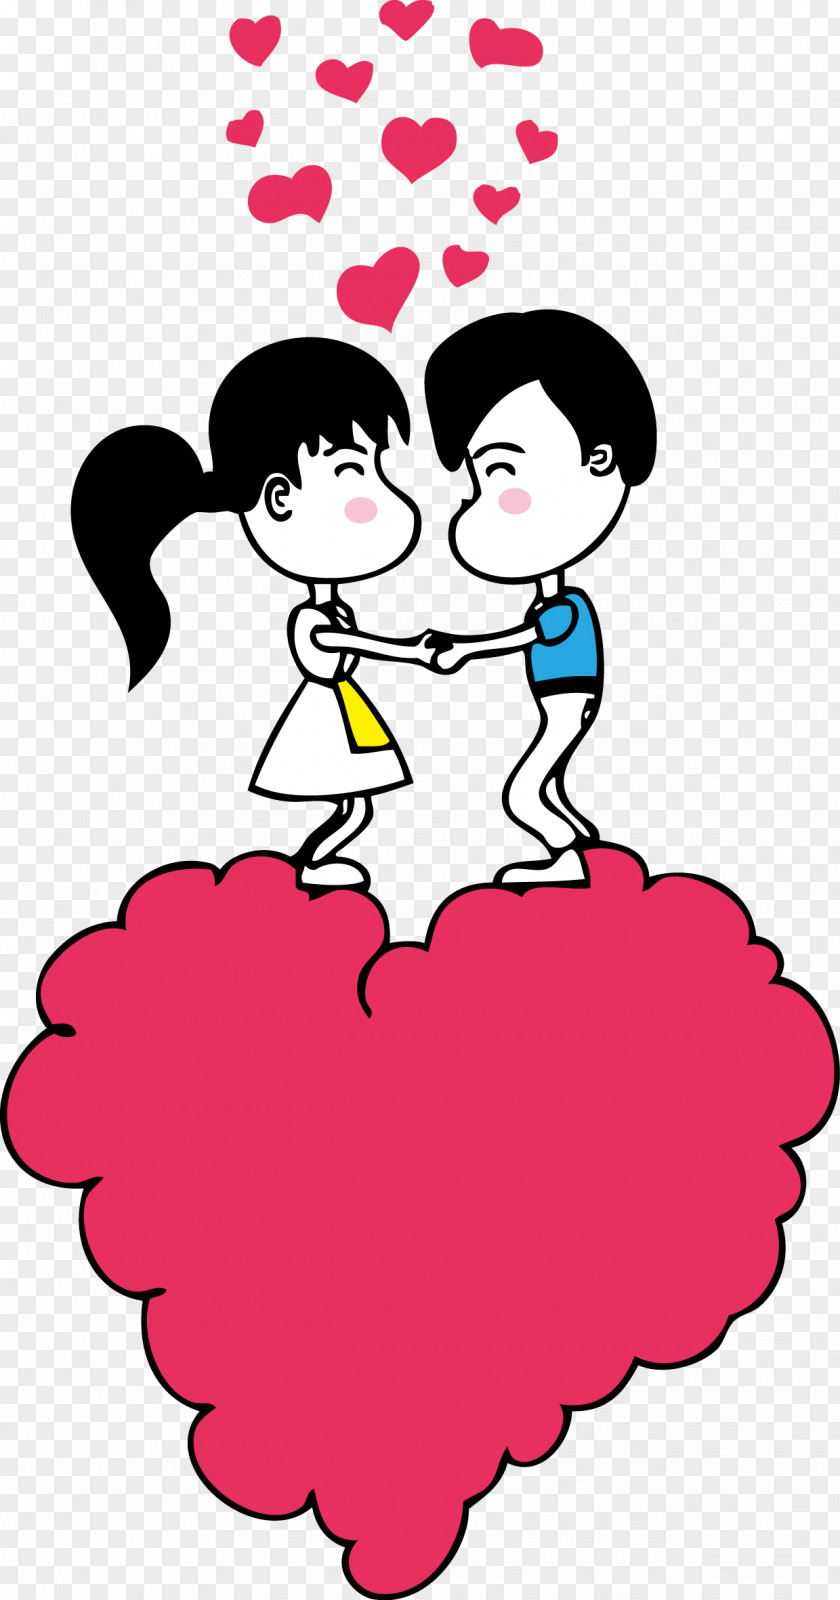 Cartoon Couple Stepped Loving Cloud Vector Material Clip Art PNG